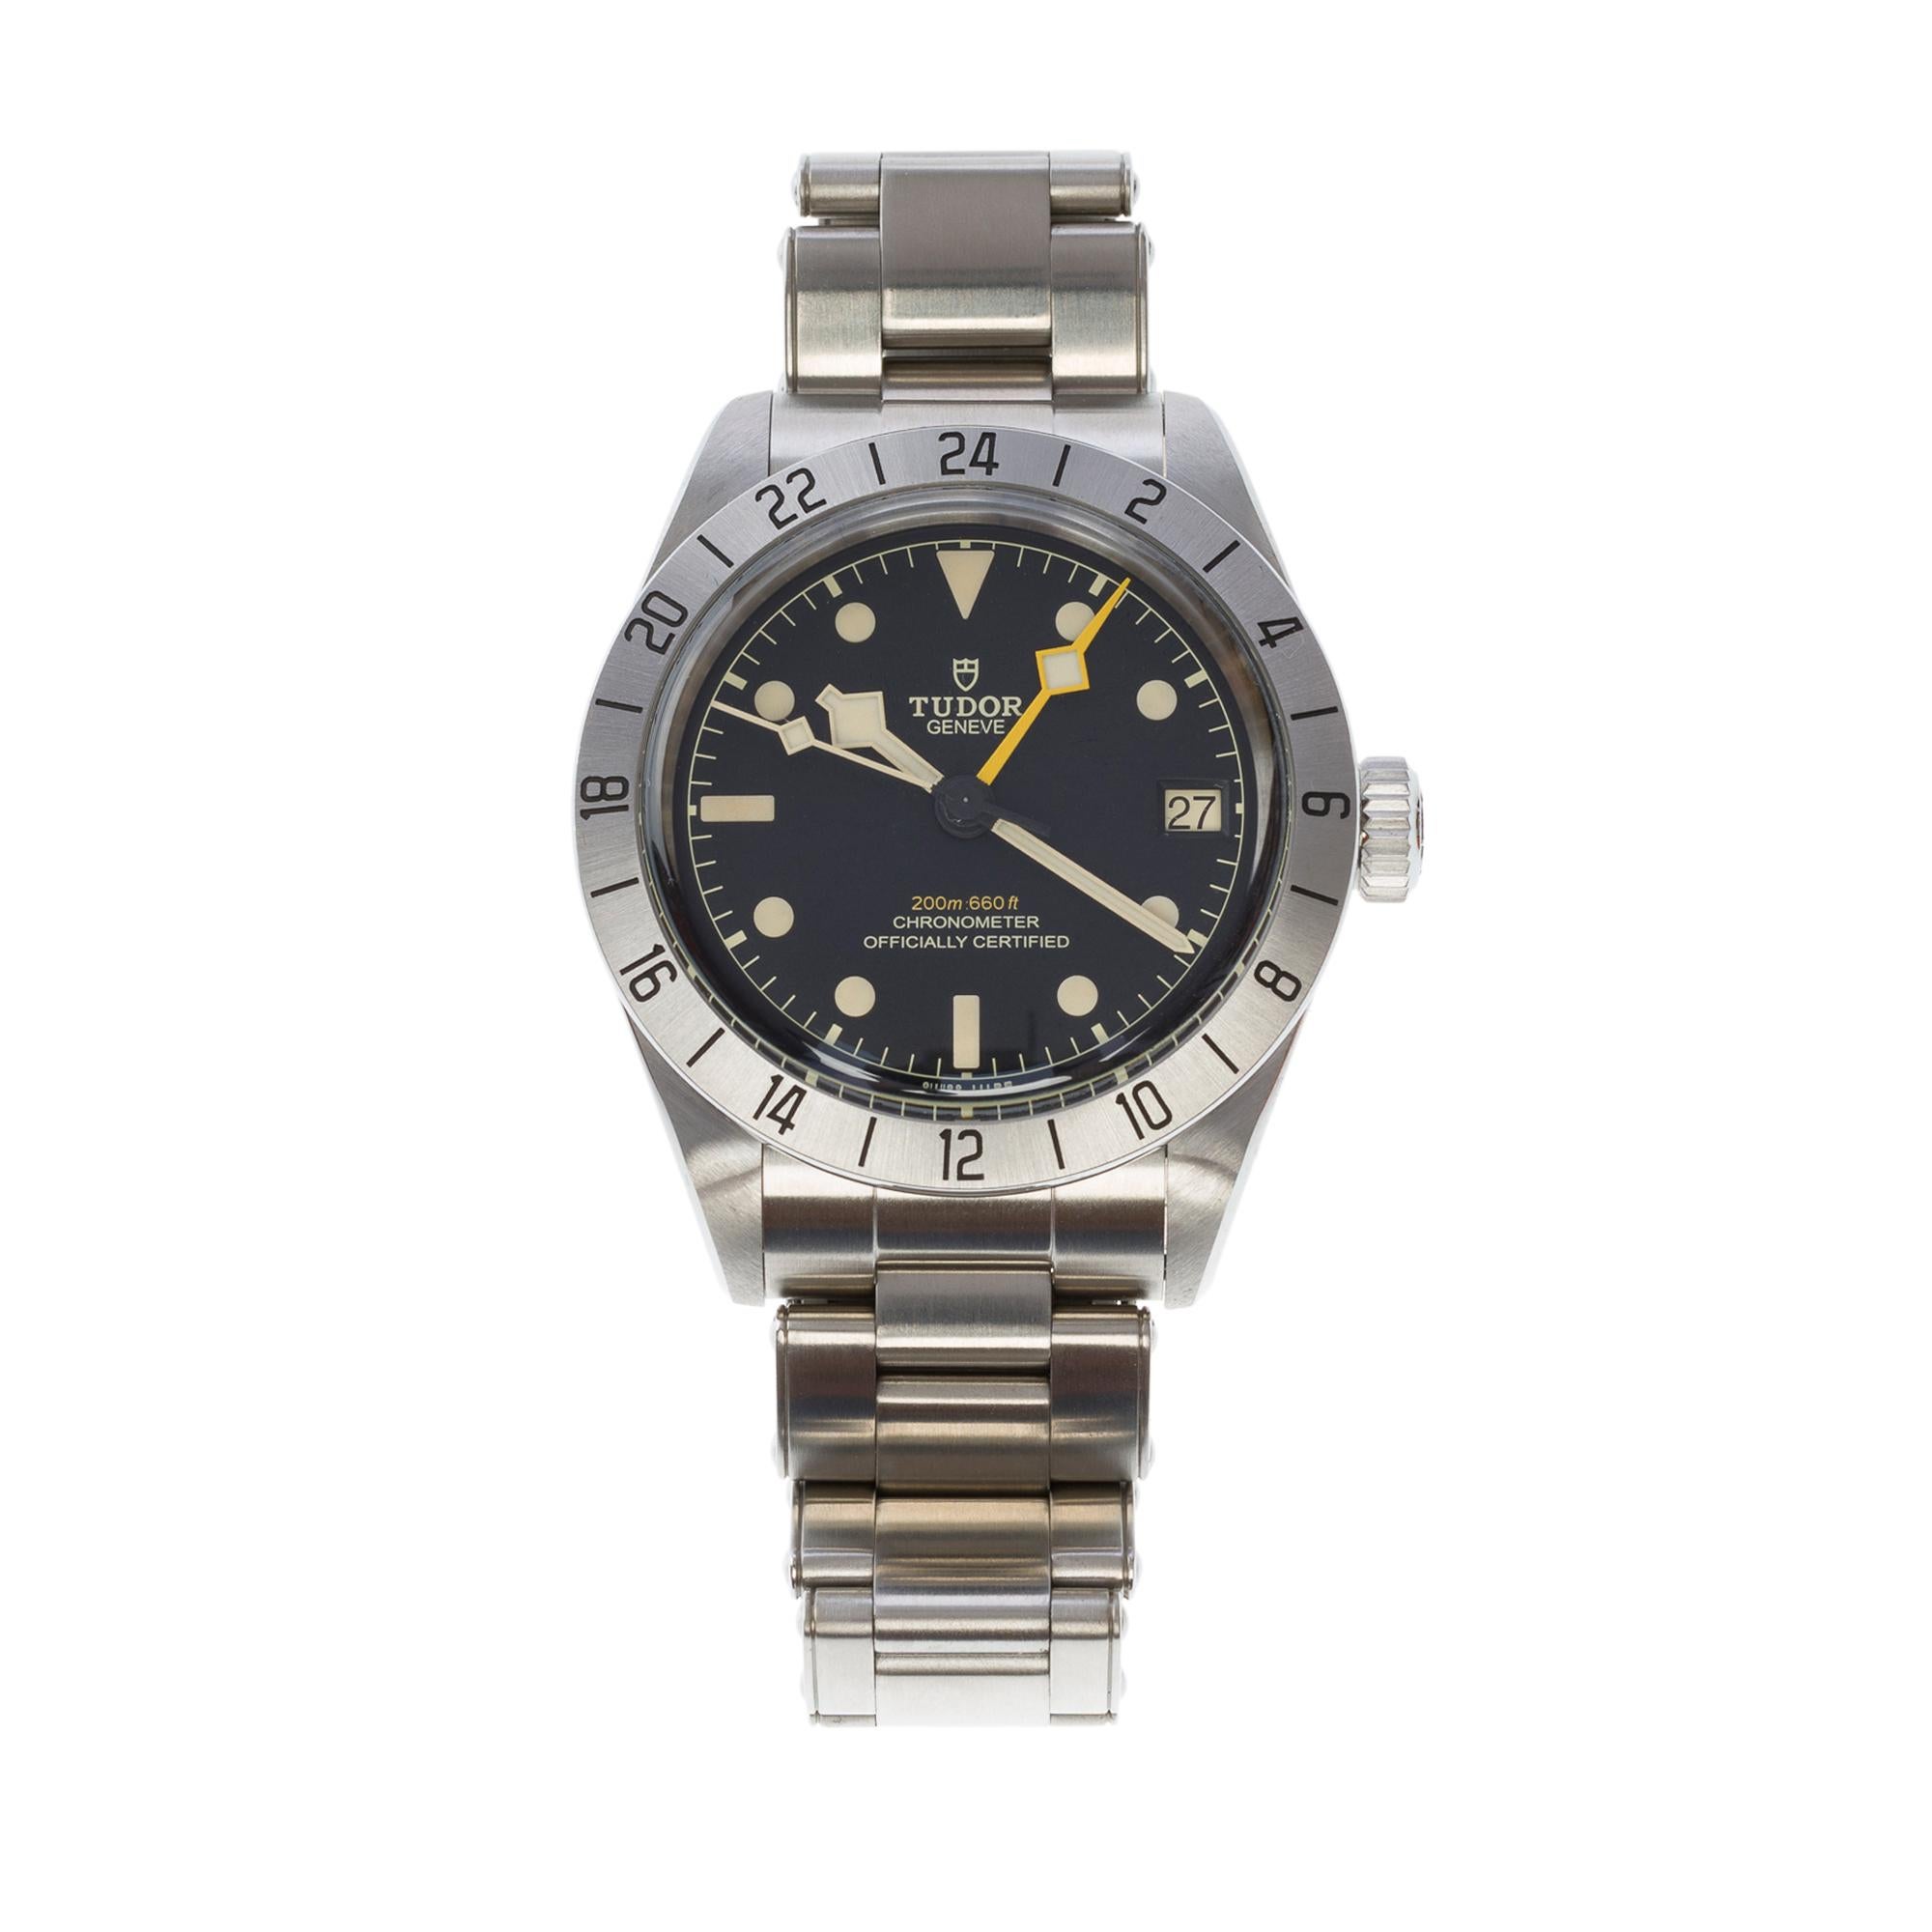 Modern Amazing Tudor Black Bay Pro 39mm Automatic Watch in steel For Sale